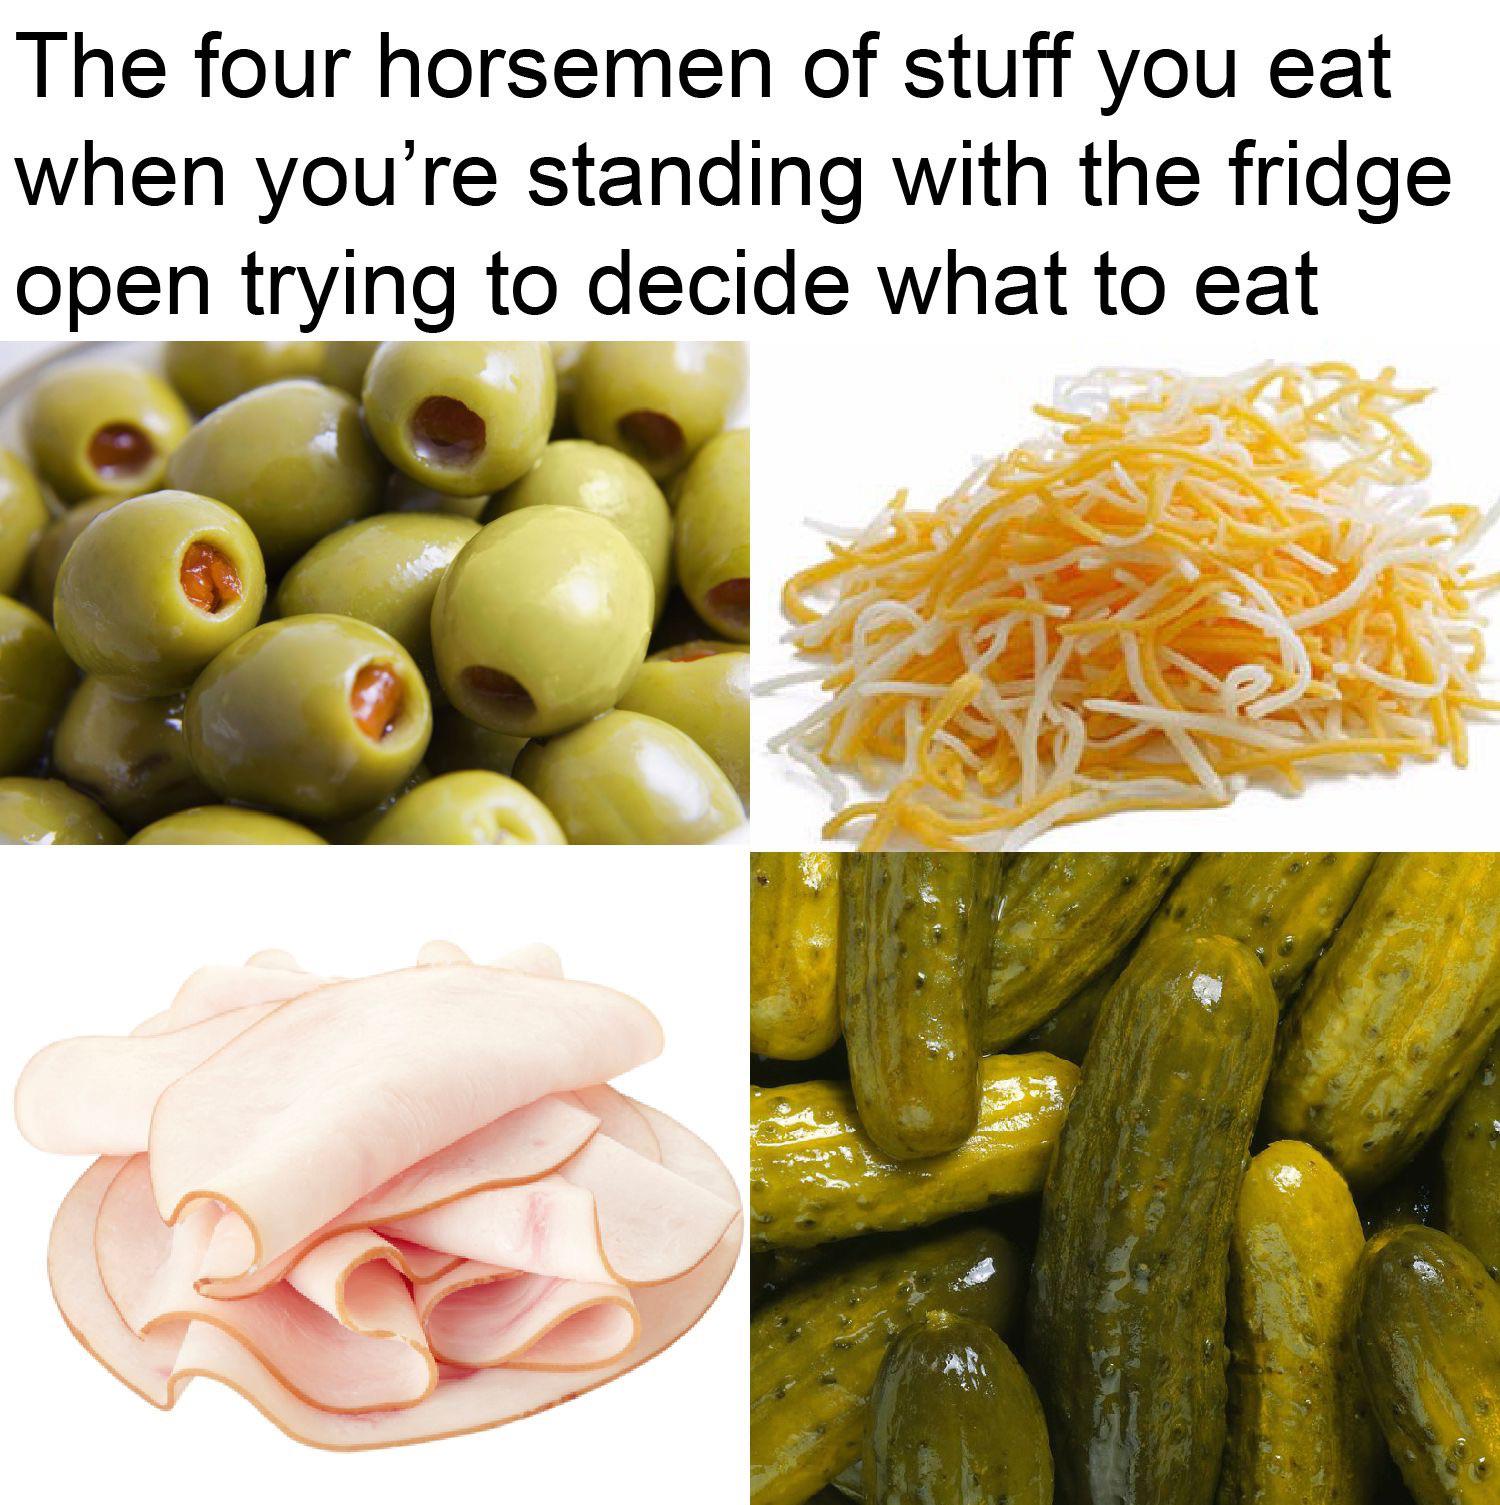 funny friday memes - natural foods - The four horsemen of stuff you eat when you're standing with the fridge open trying to decide what to eat